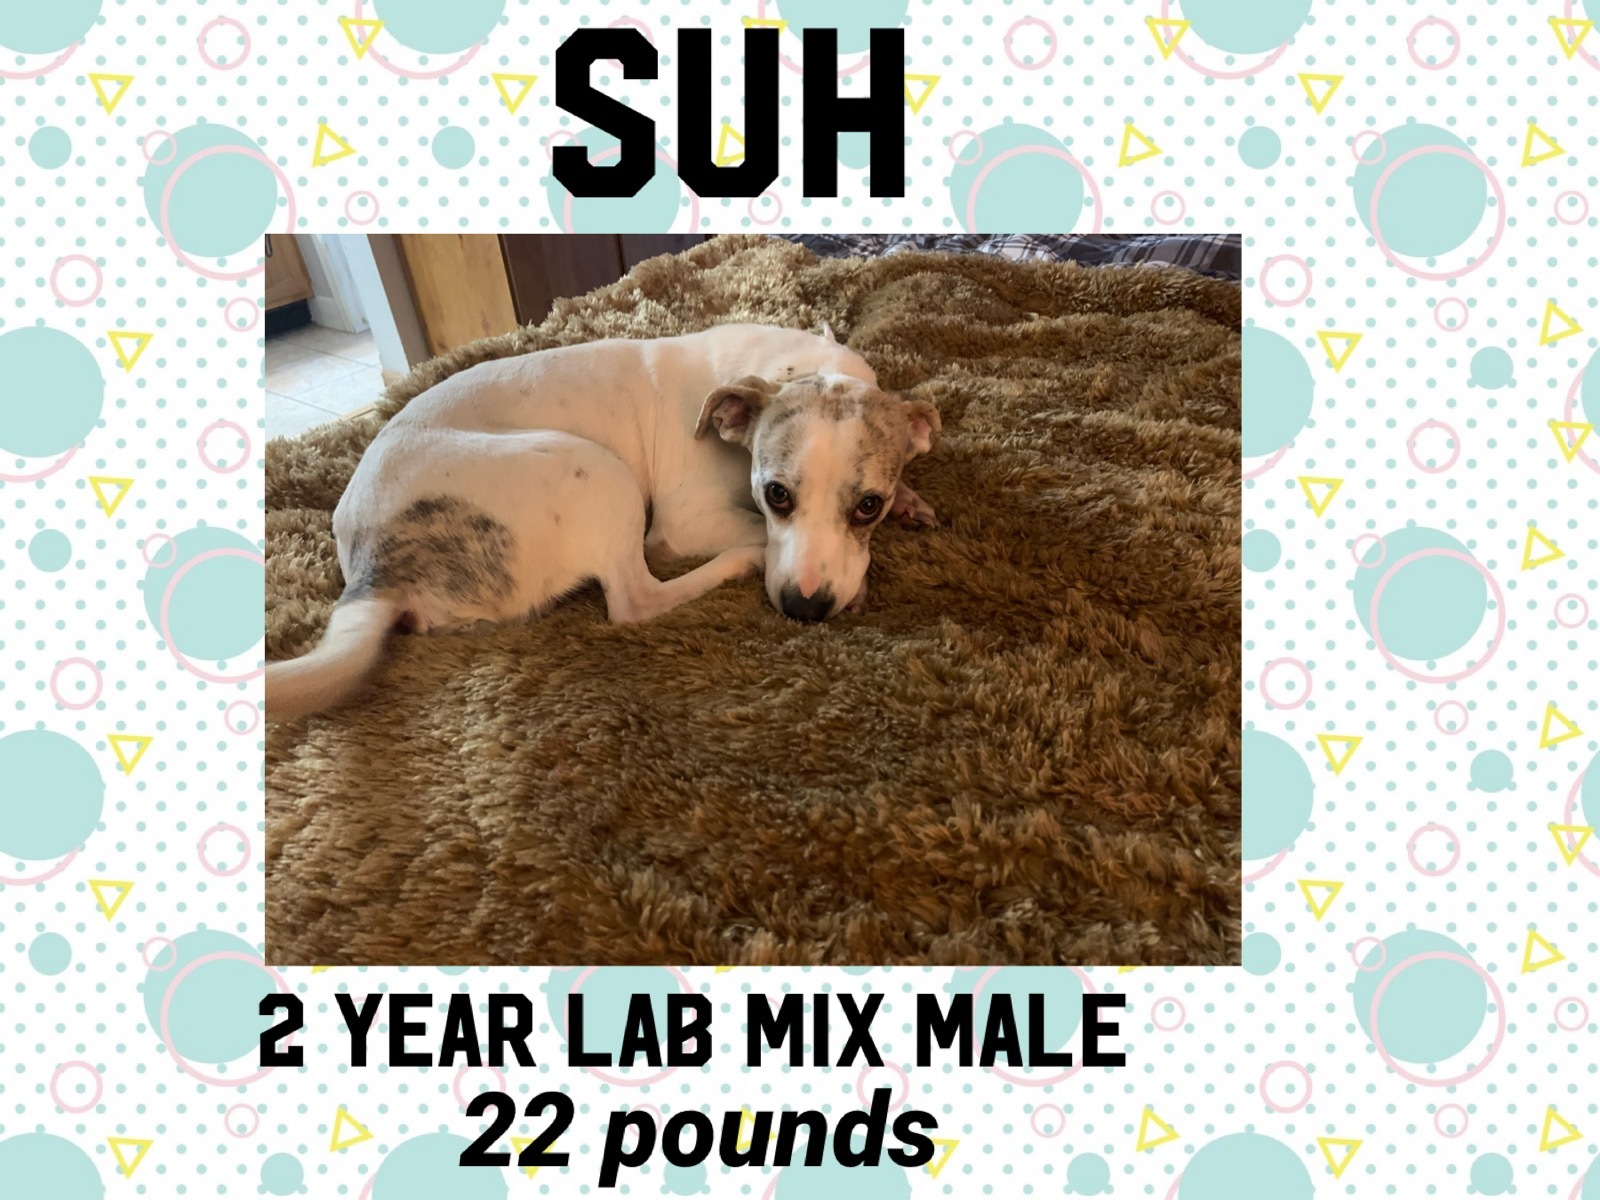 Suh 2 Year Lab Mix Male detail page